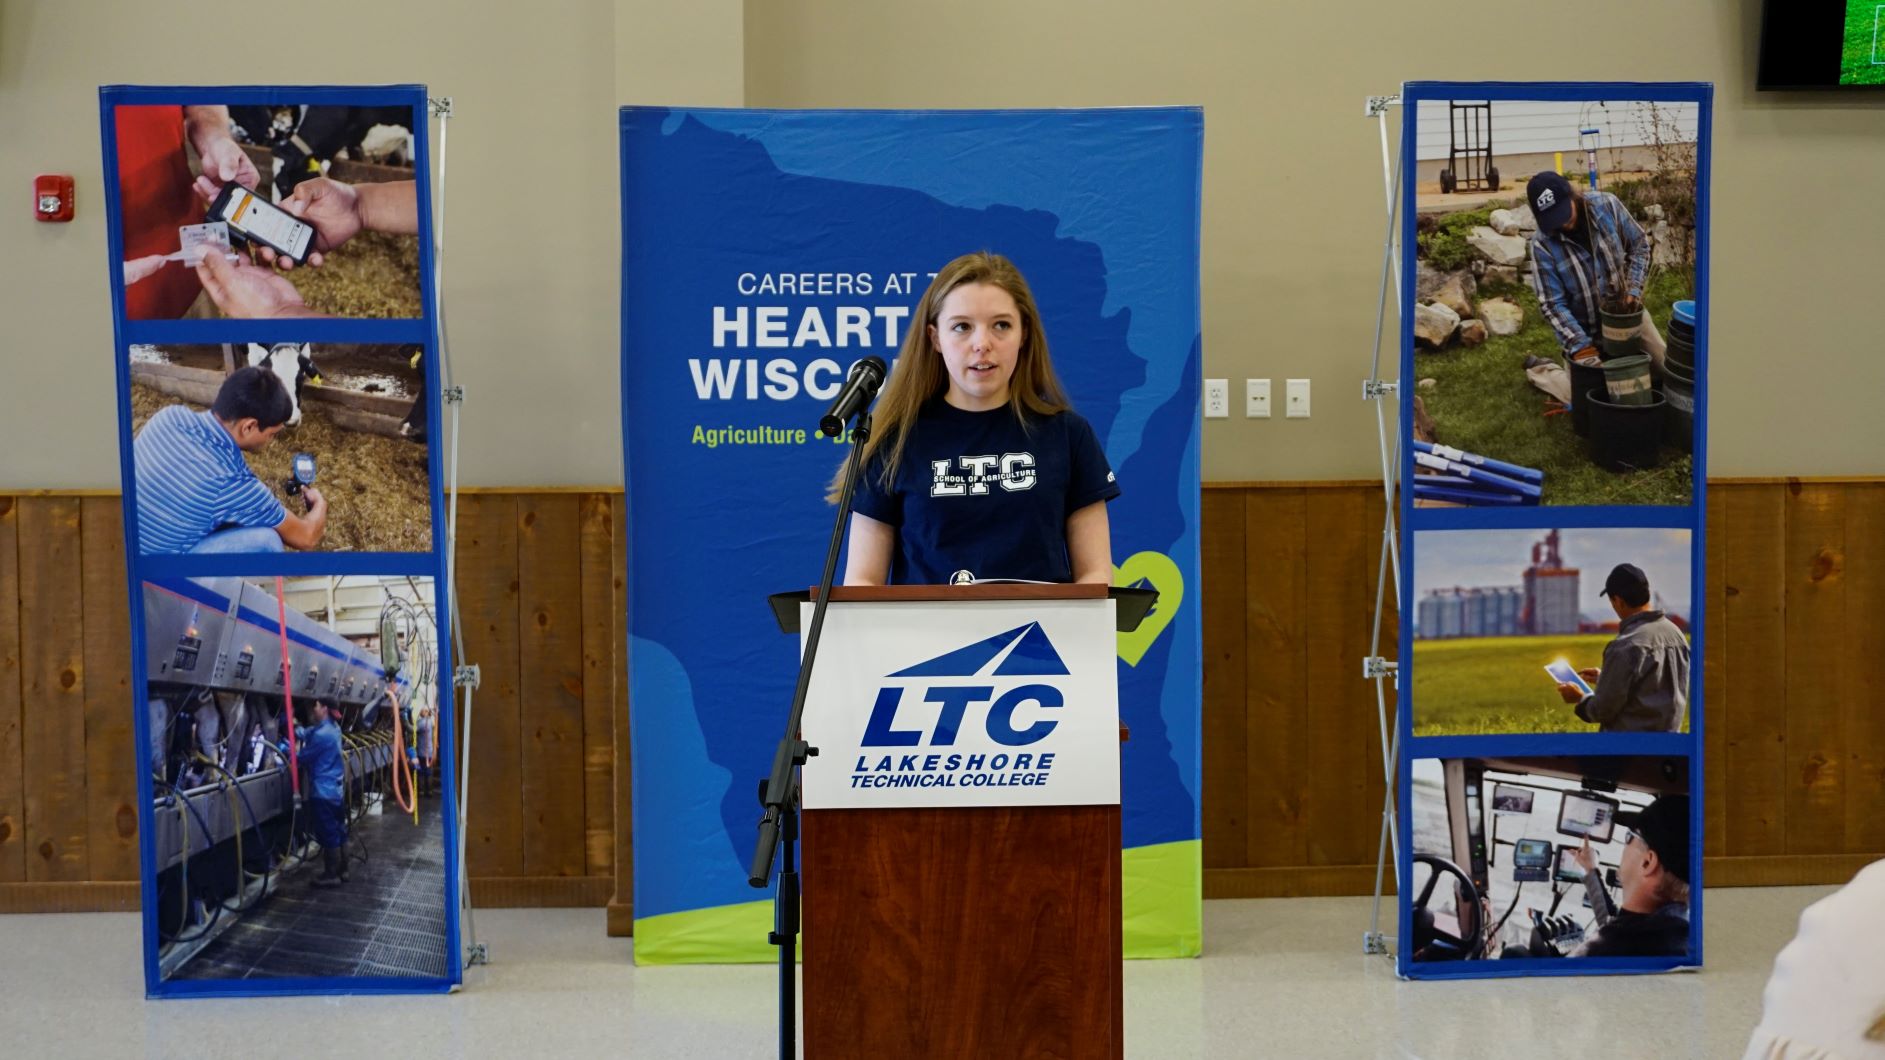 Student speaker Heather Griesmer shared what she is learning through LTC’s Agribusiness Science and Technology program.